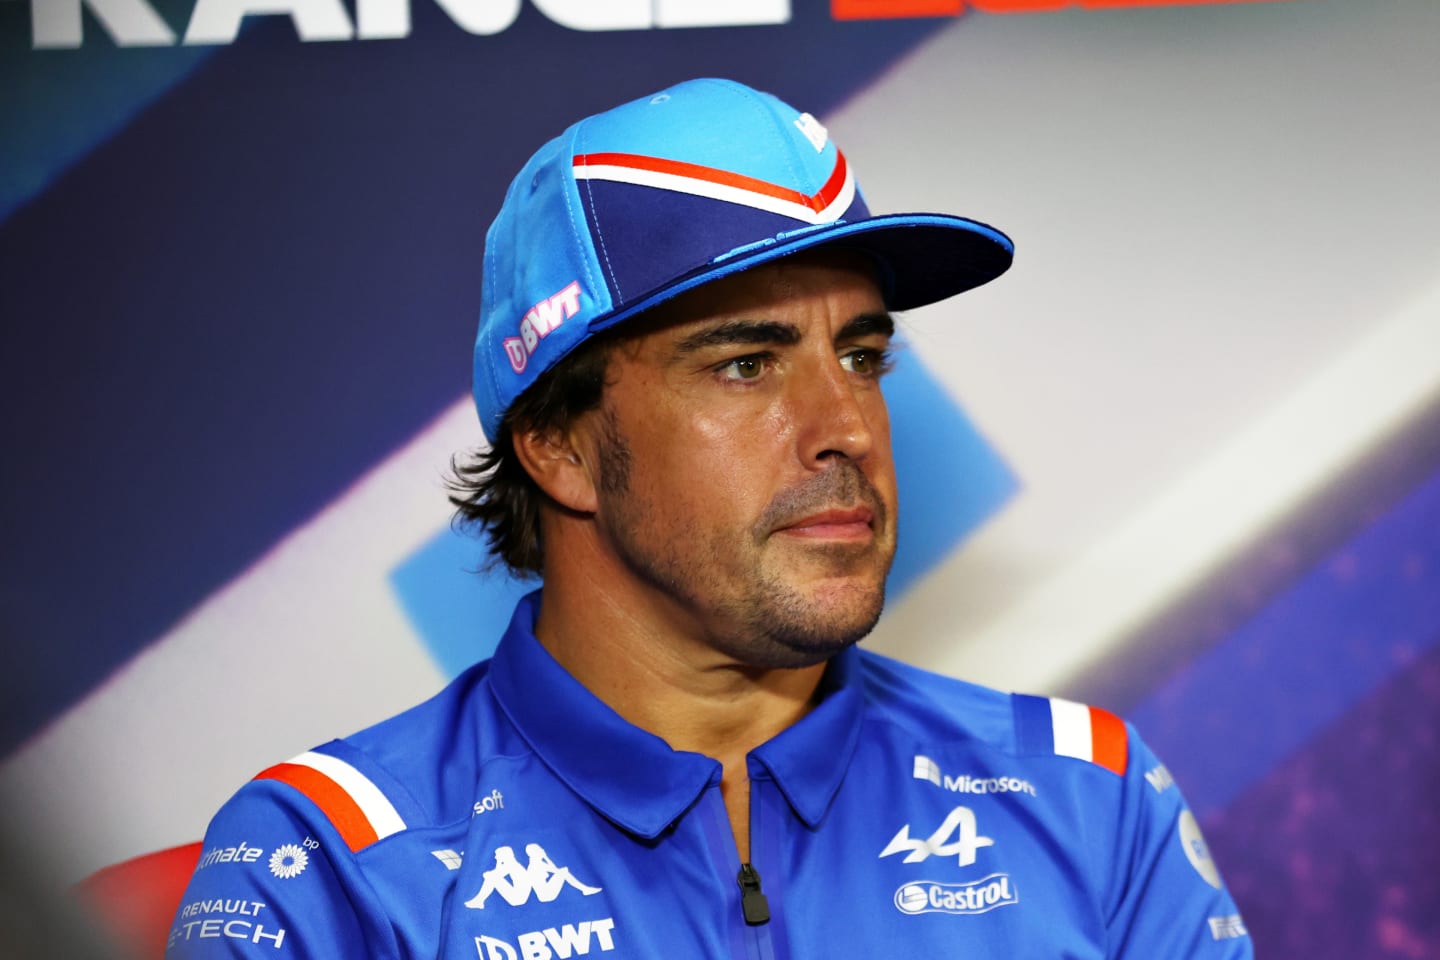 LE CASTELLET, FRANCE - JULY 21: Fernando Alonso of Spain and Alpine F1 talks in the Drivers Press Conference during previews ahead of the F1 Grand Prix of France at Circuit Paul Ricard on July 21, 2022 in Le Castellet, France. (Photo by Bryn Lennon/Getty Images)